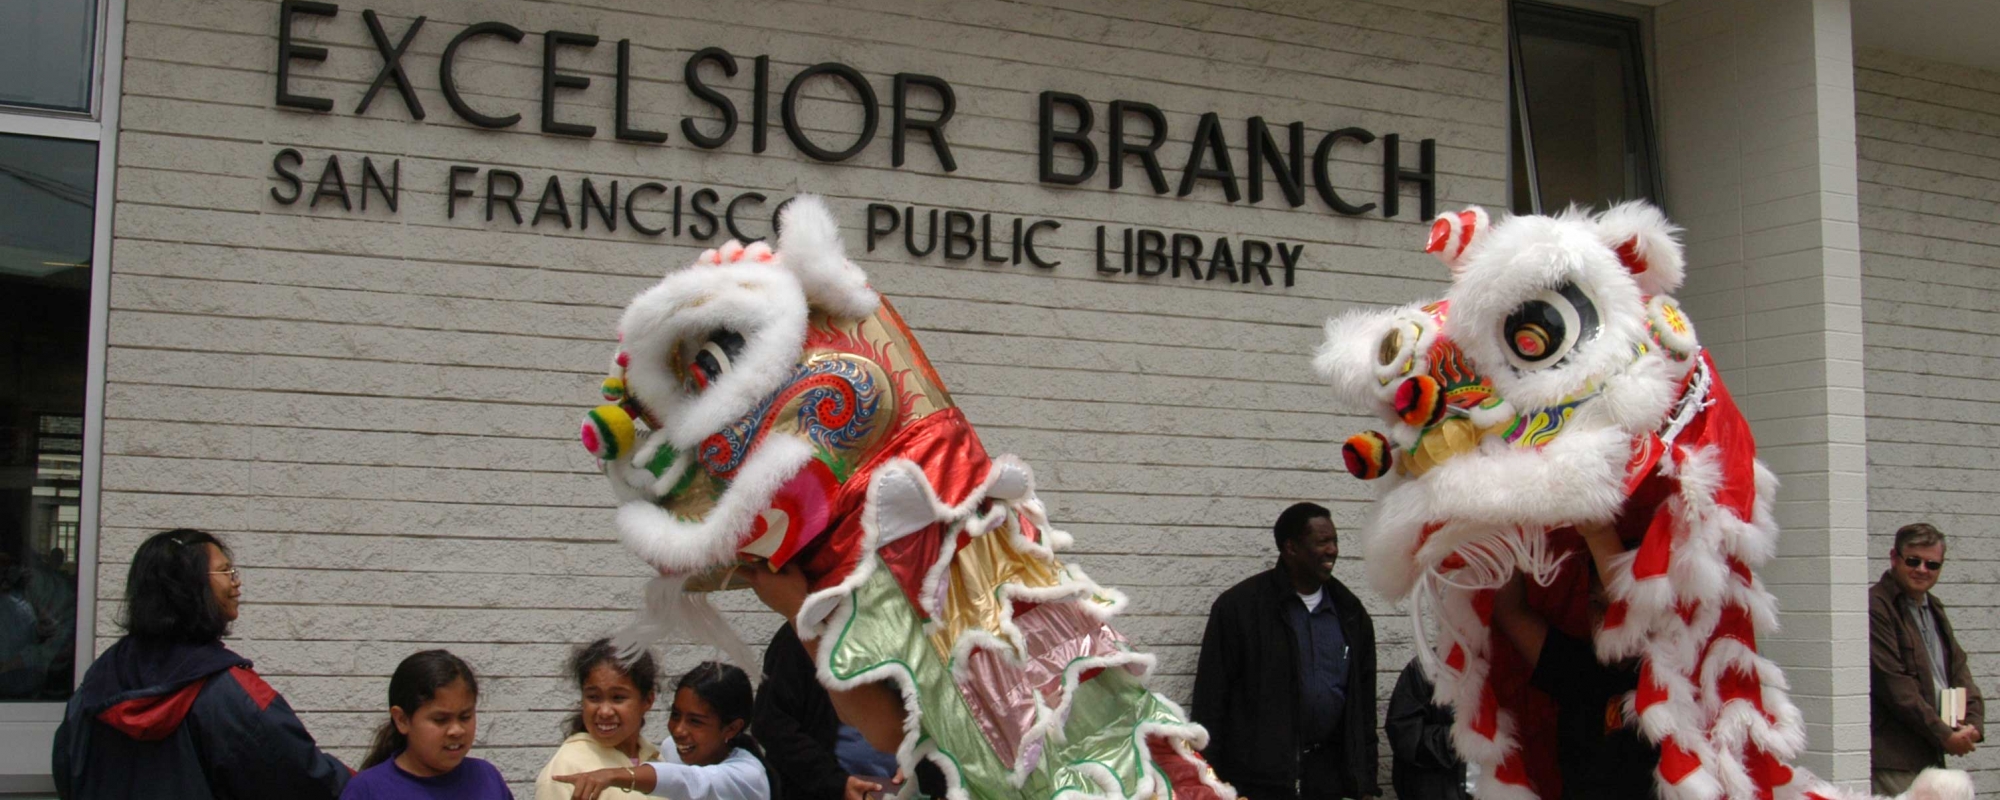 Excelsior Branch Library